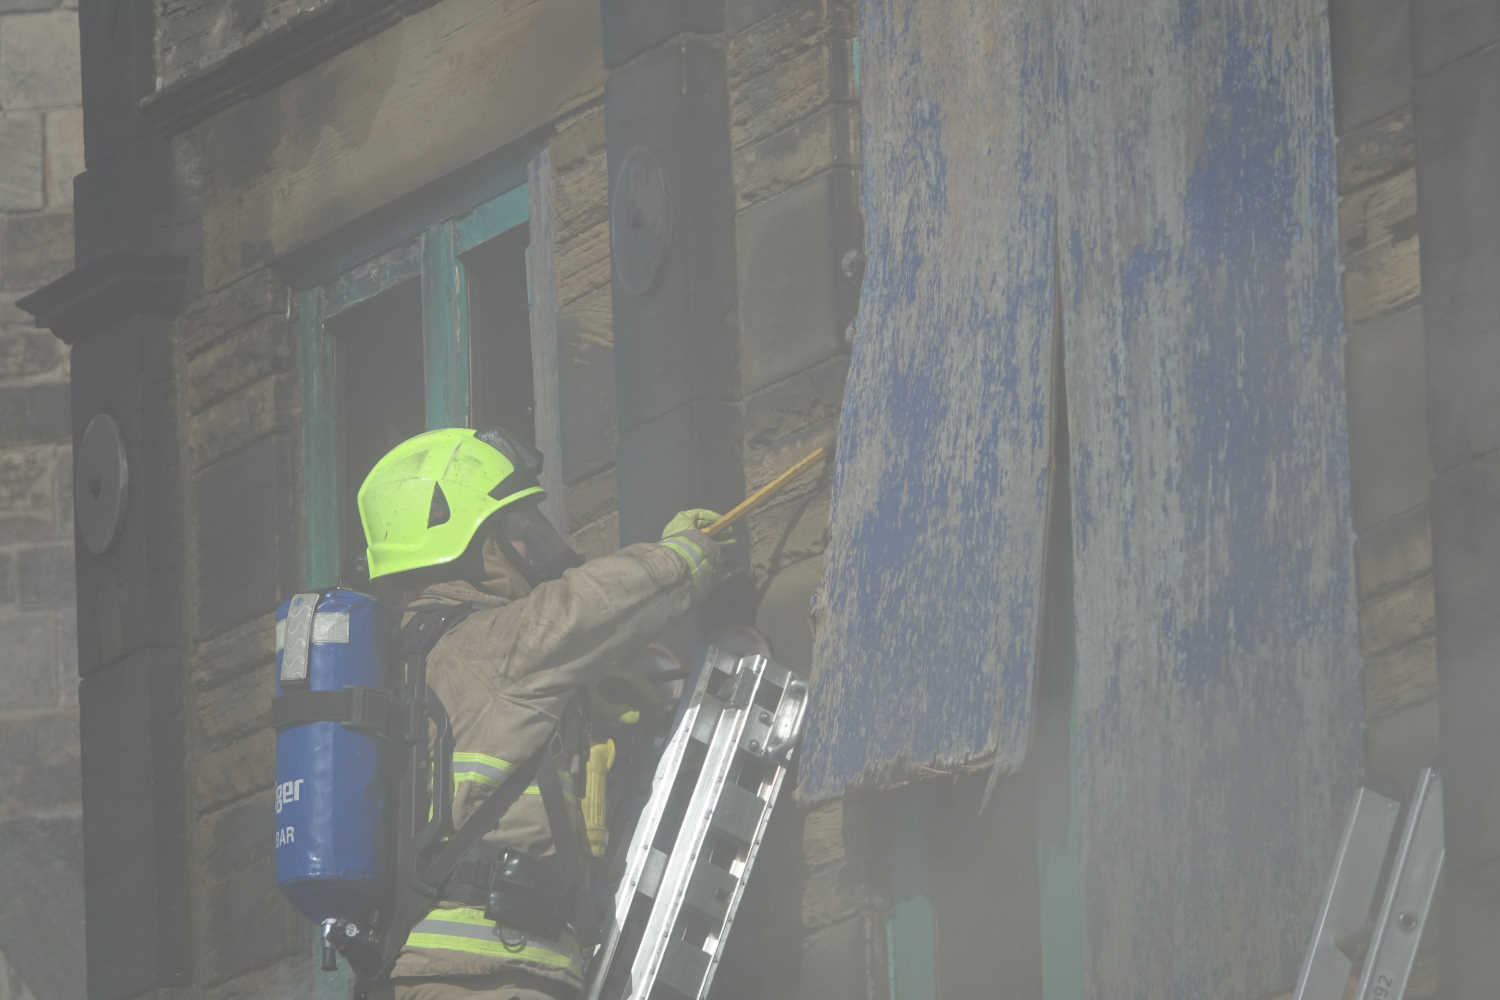 he old McColls building in Starbeck was set alight